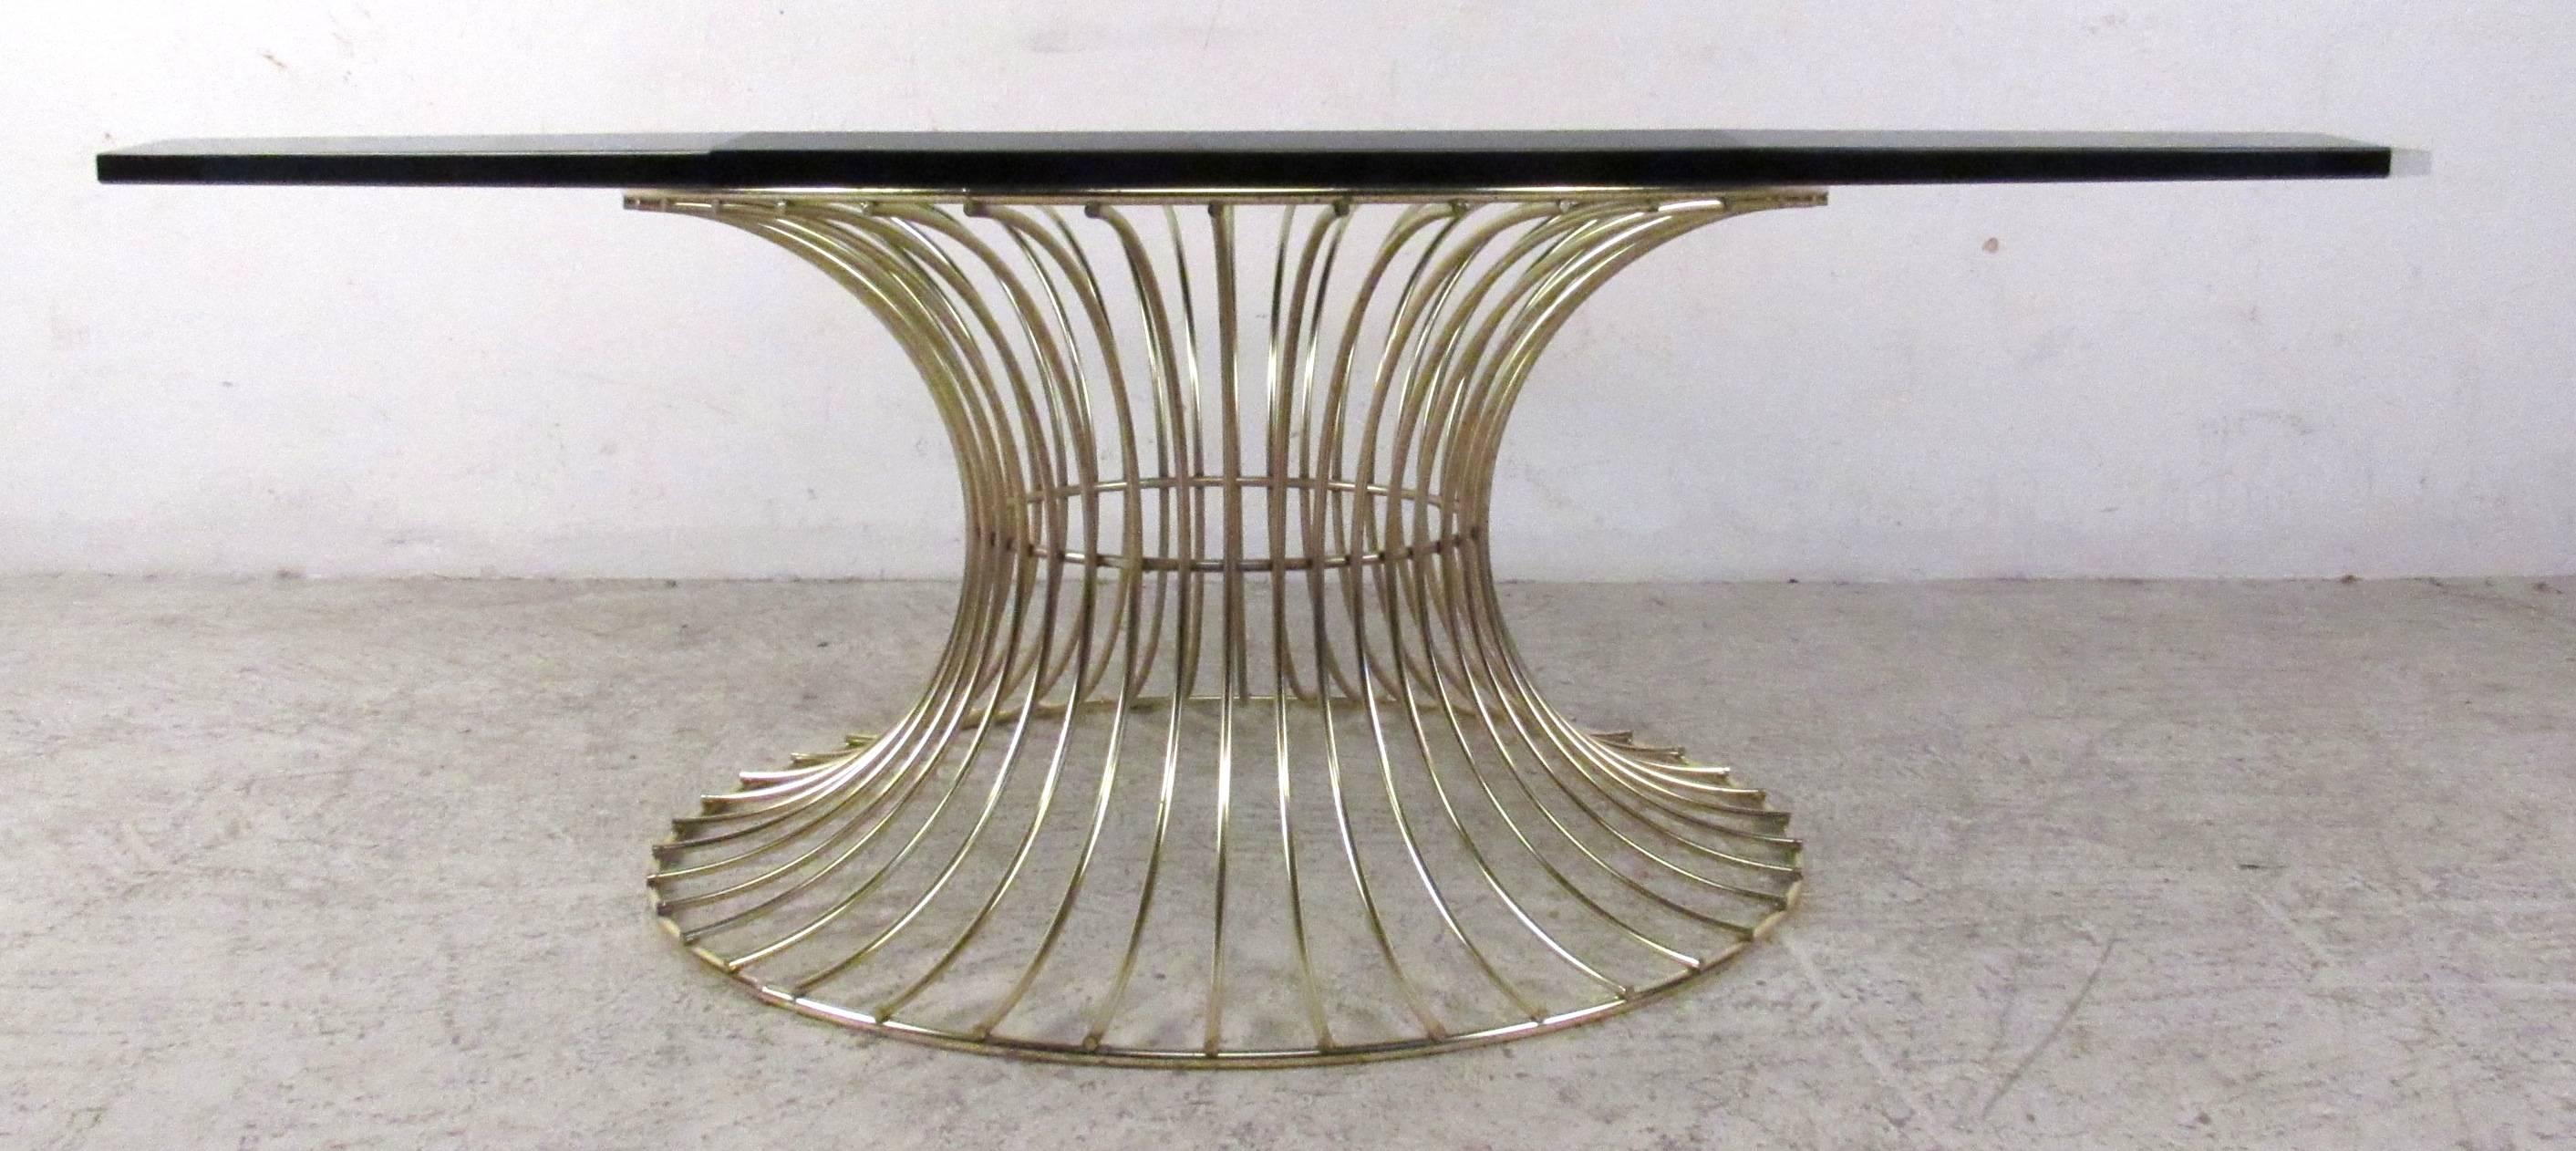 Vintage-modern coffee table featuring beautiful sculpted brass base and solid octagonal glass top.

Please confirm item location NY or NJ with dealer.